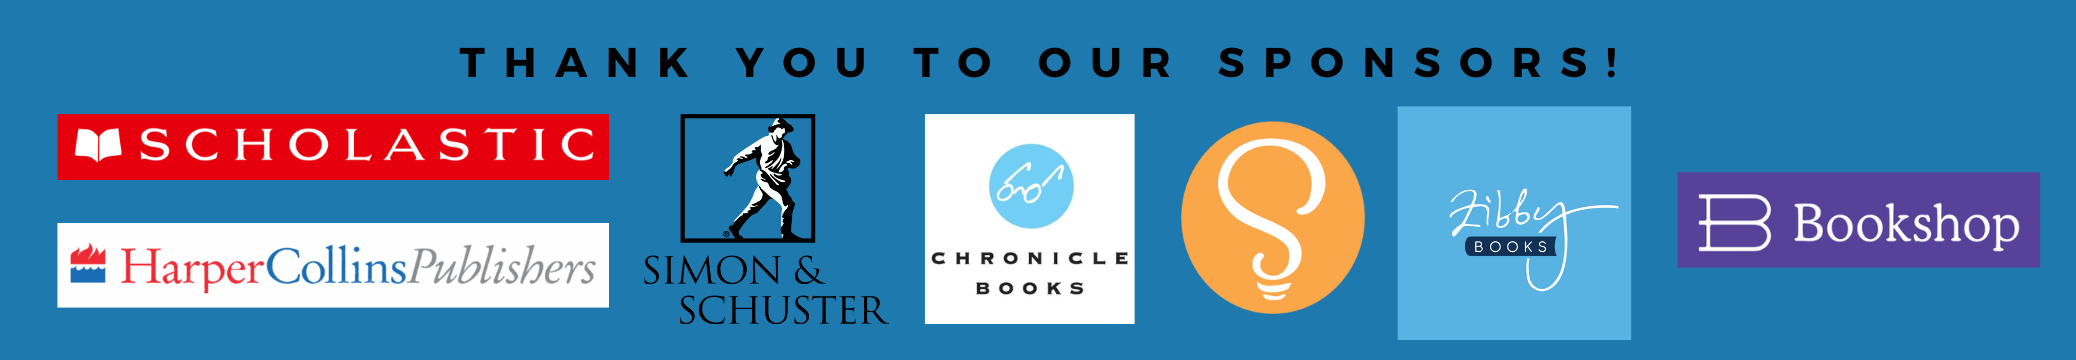 Thank you to our sponsors! Logos for Scholastic, HarperCollins Publishers, Sourcebooks, and Bookshop.org